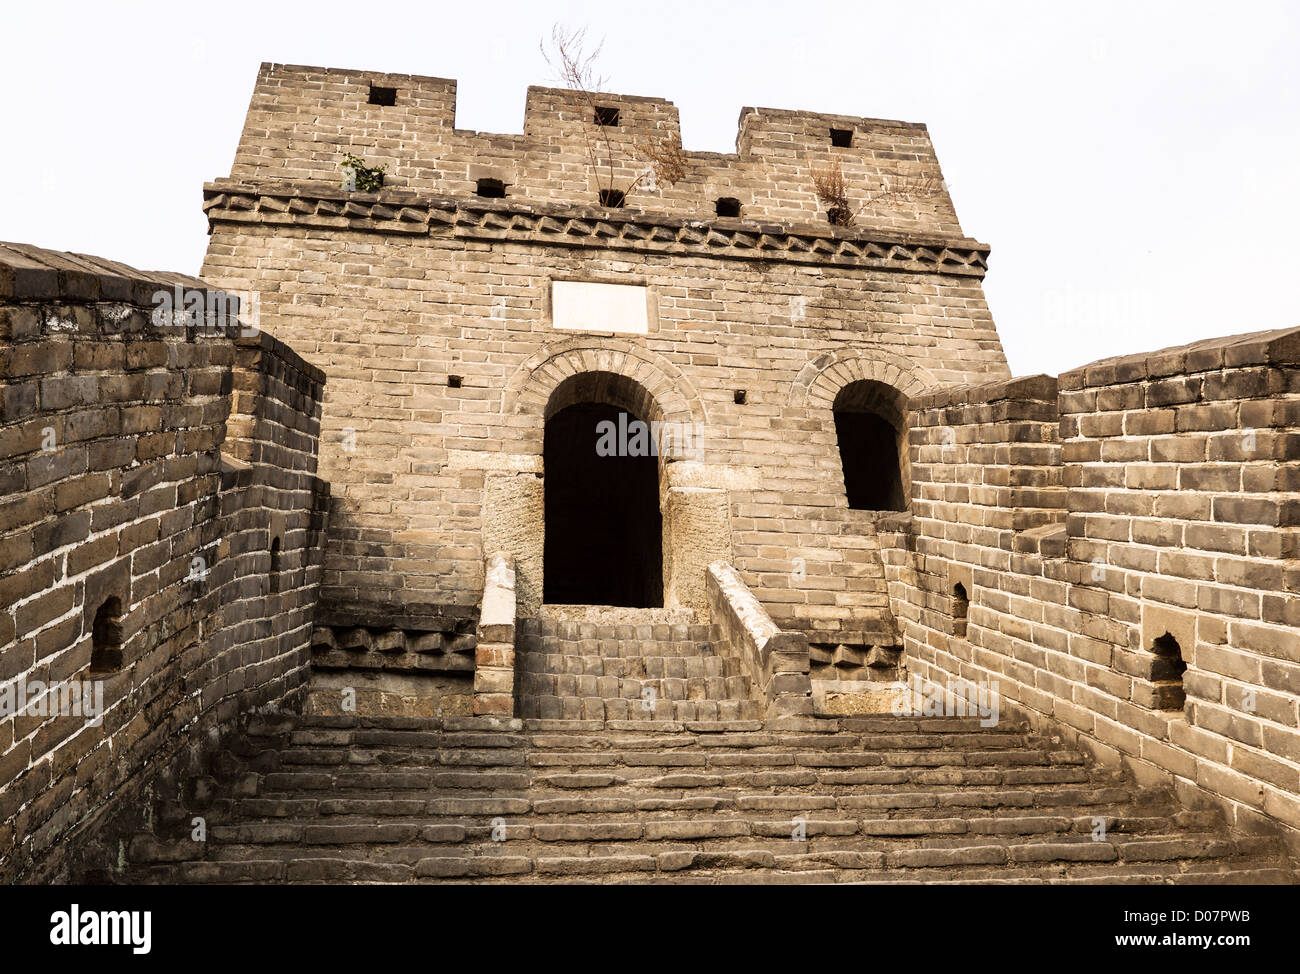 Close up view of the Great Wall in China with sky in background Stock Photo